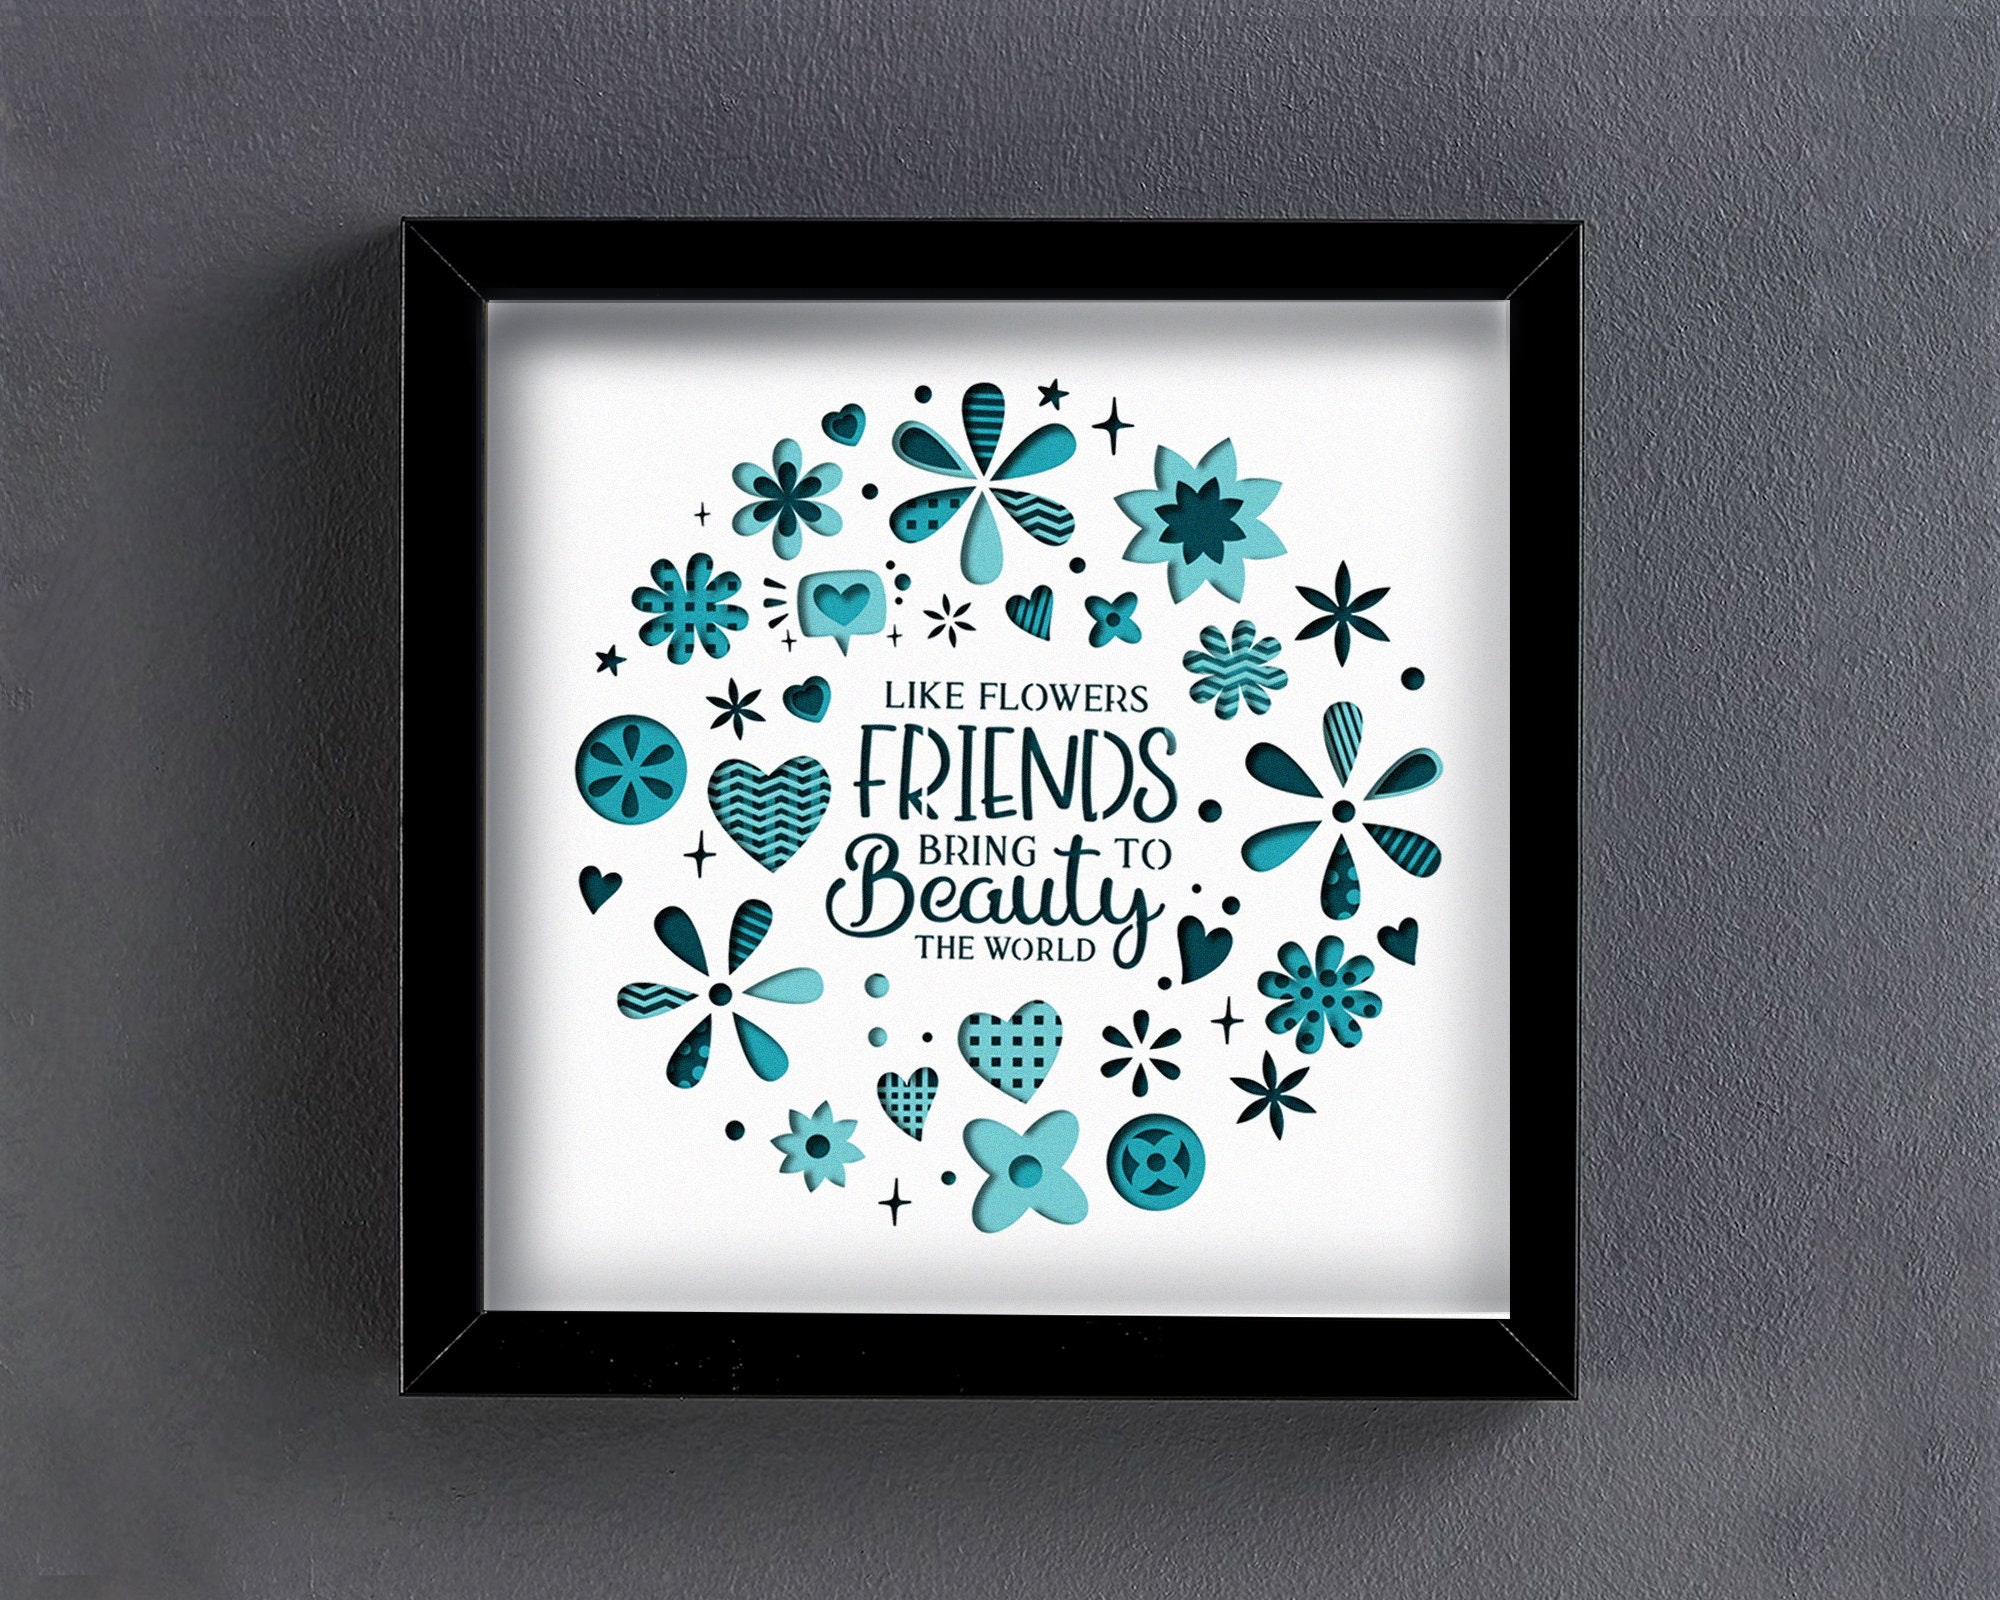 Shadow Box Frame 9x9 Inch SVG Template With and Without Scoring